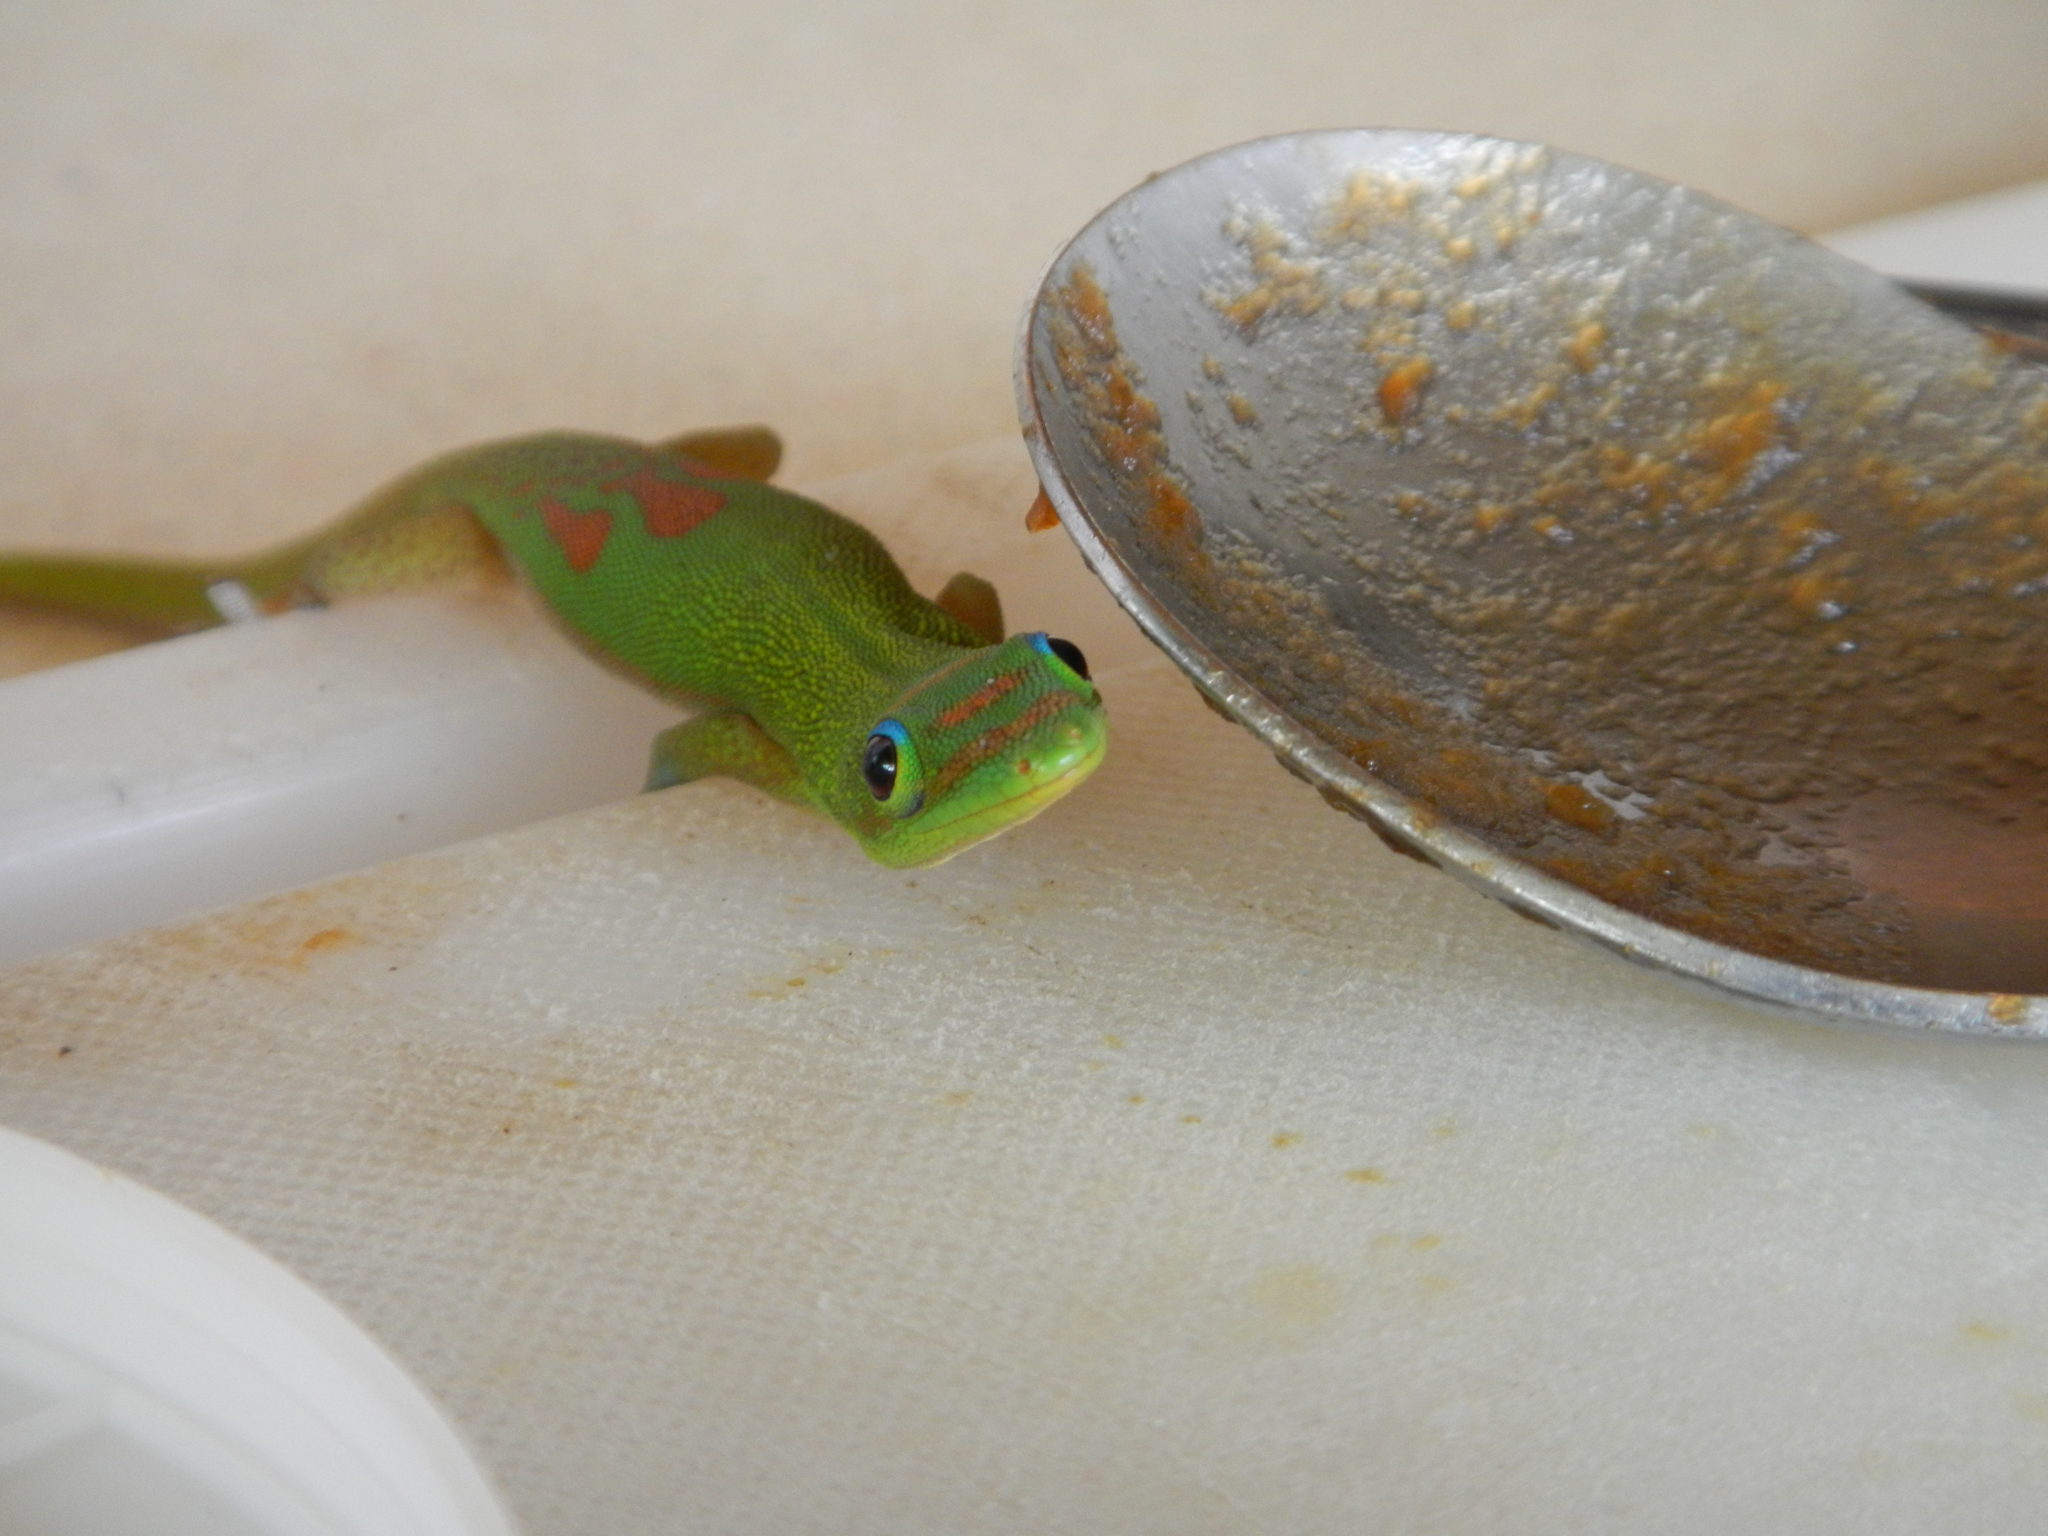 Gecko licking apple butter from a spoon on a cutting board